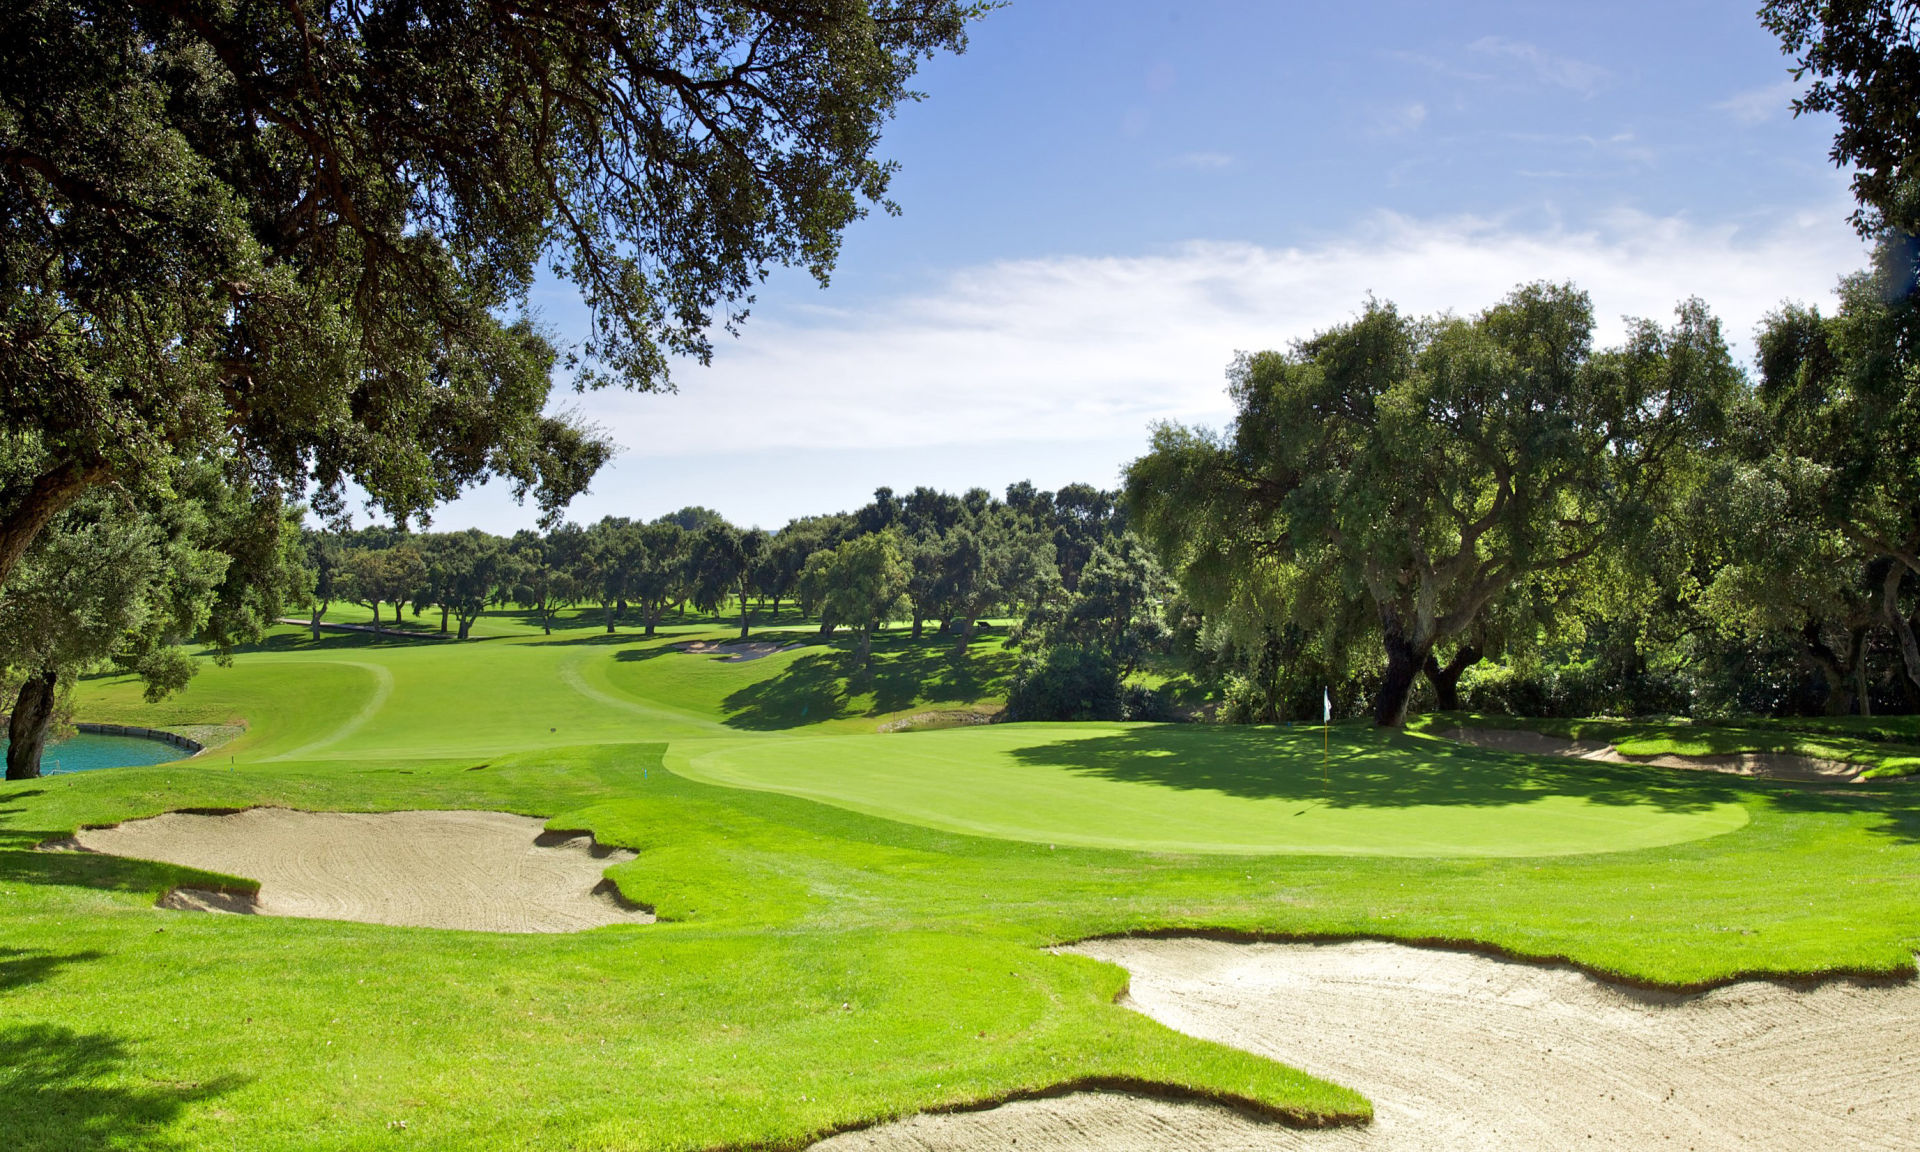 Vibrant view of Valderrama Golf Club showcasing lush green fairways, strategic sand bunkers, and a tranquil water hazard framed by mature oak trees under a clear sky.